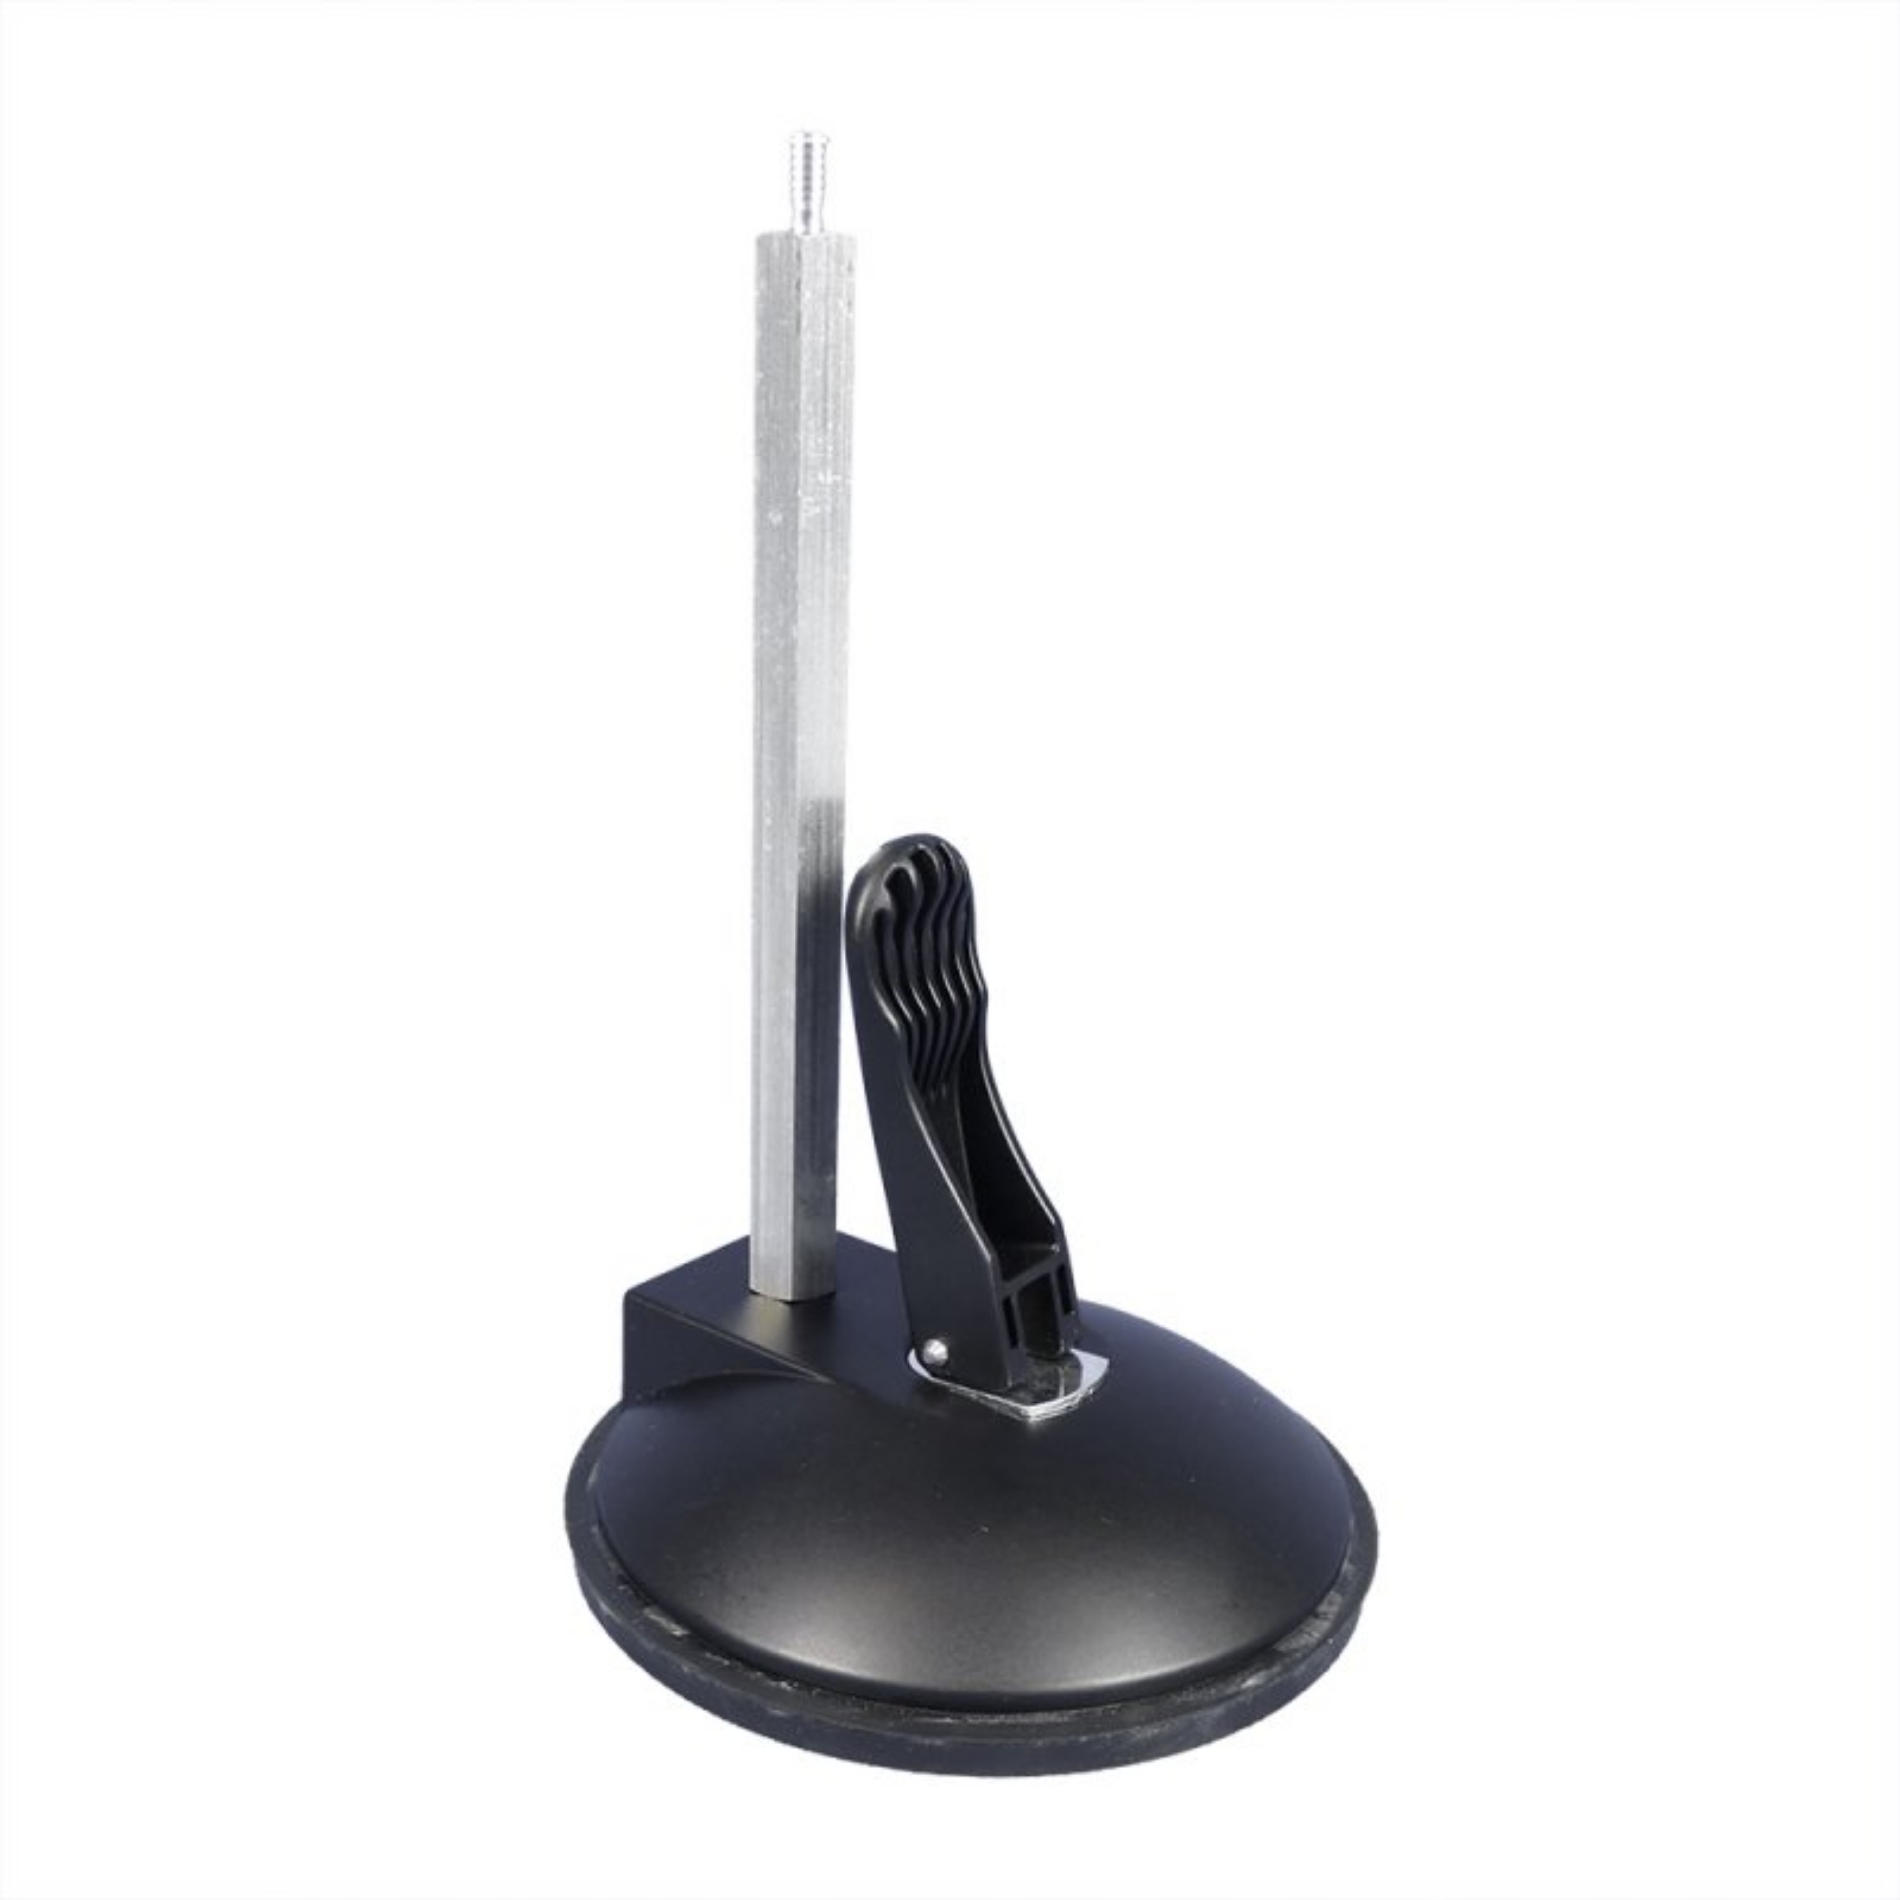 https://www.sunbeltsales.co.uk/images/thumbs/0006898_reference-sphere-suction-cup-holder_1900.jpeg